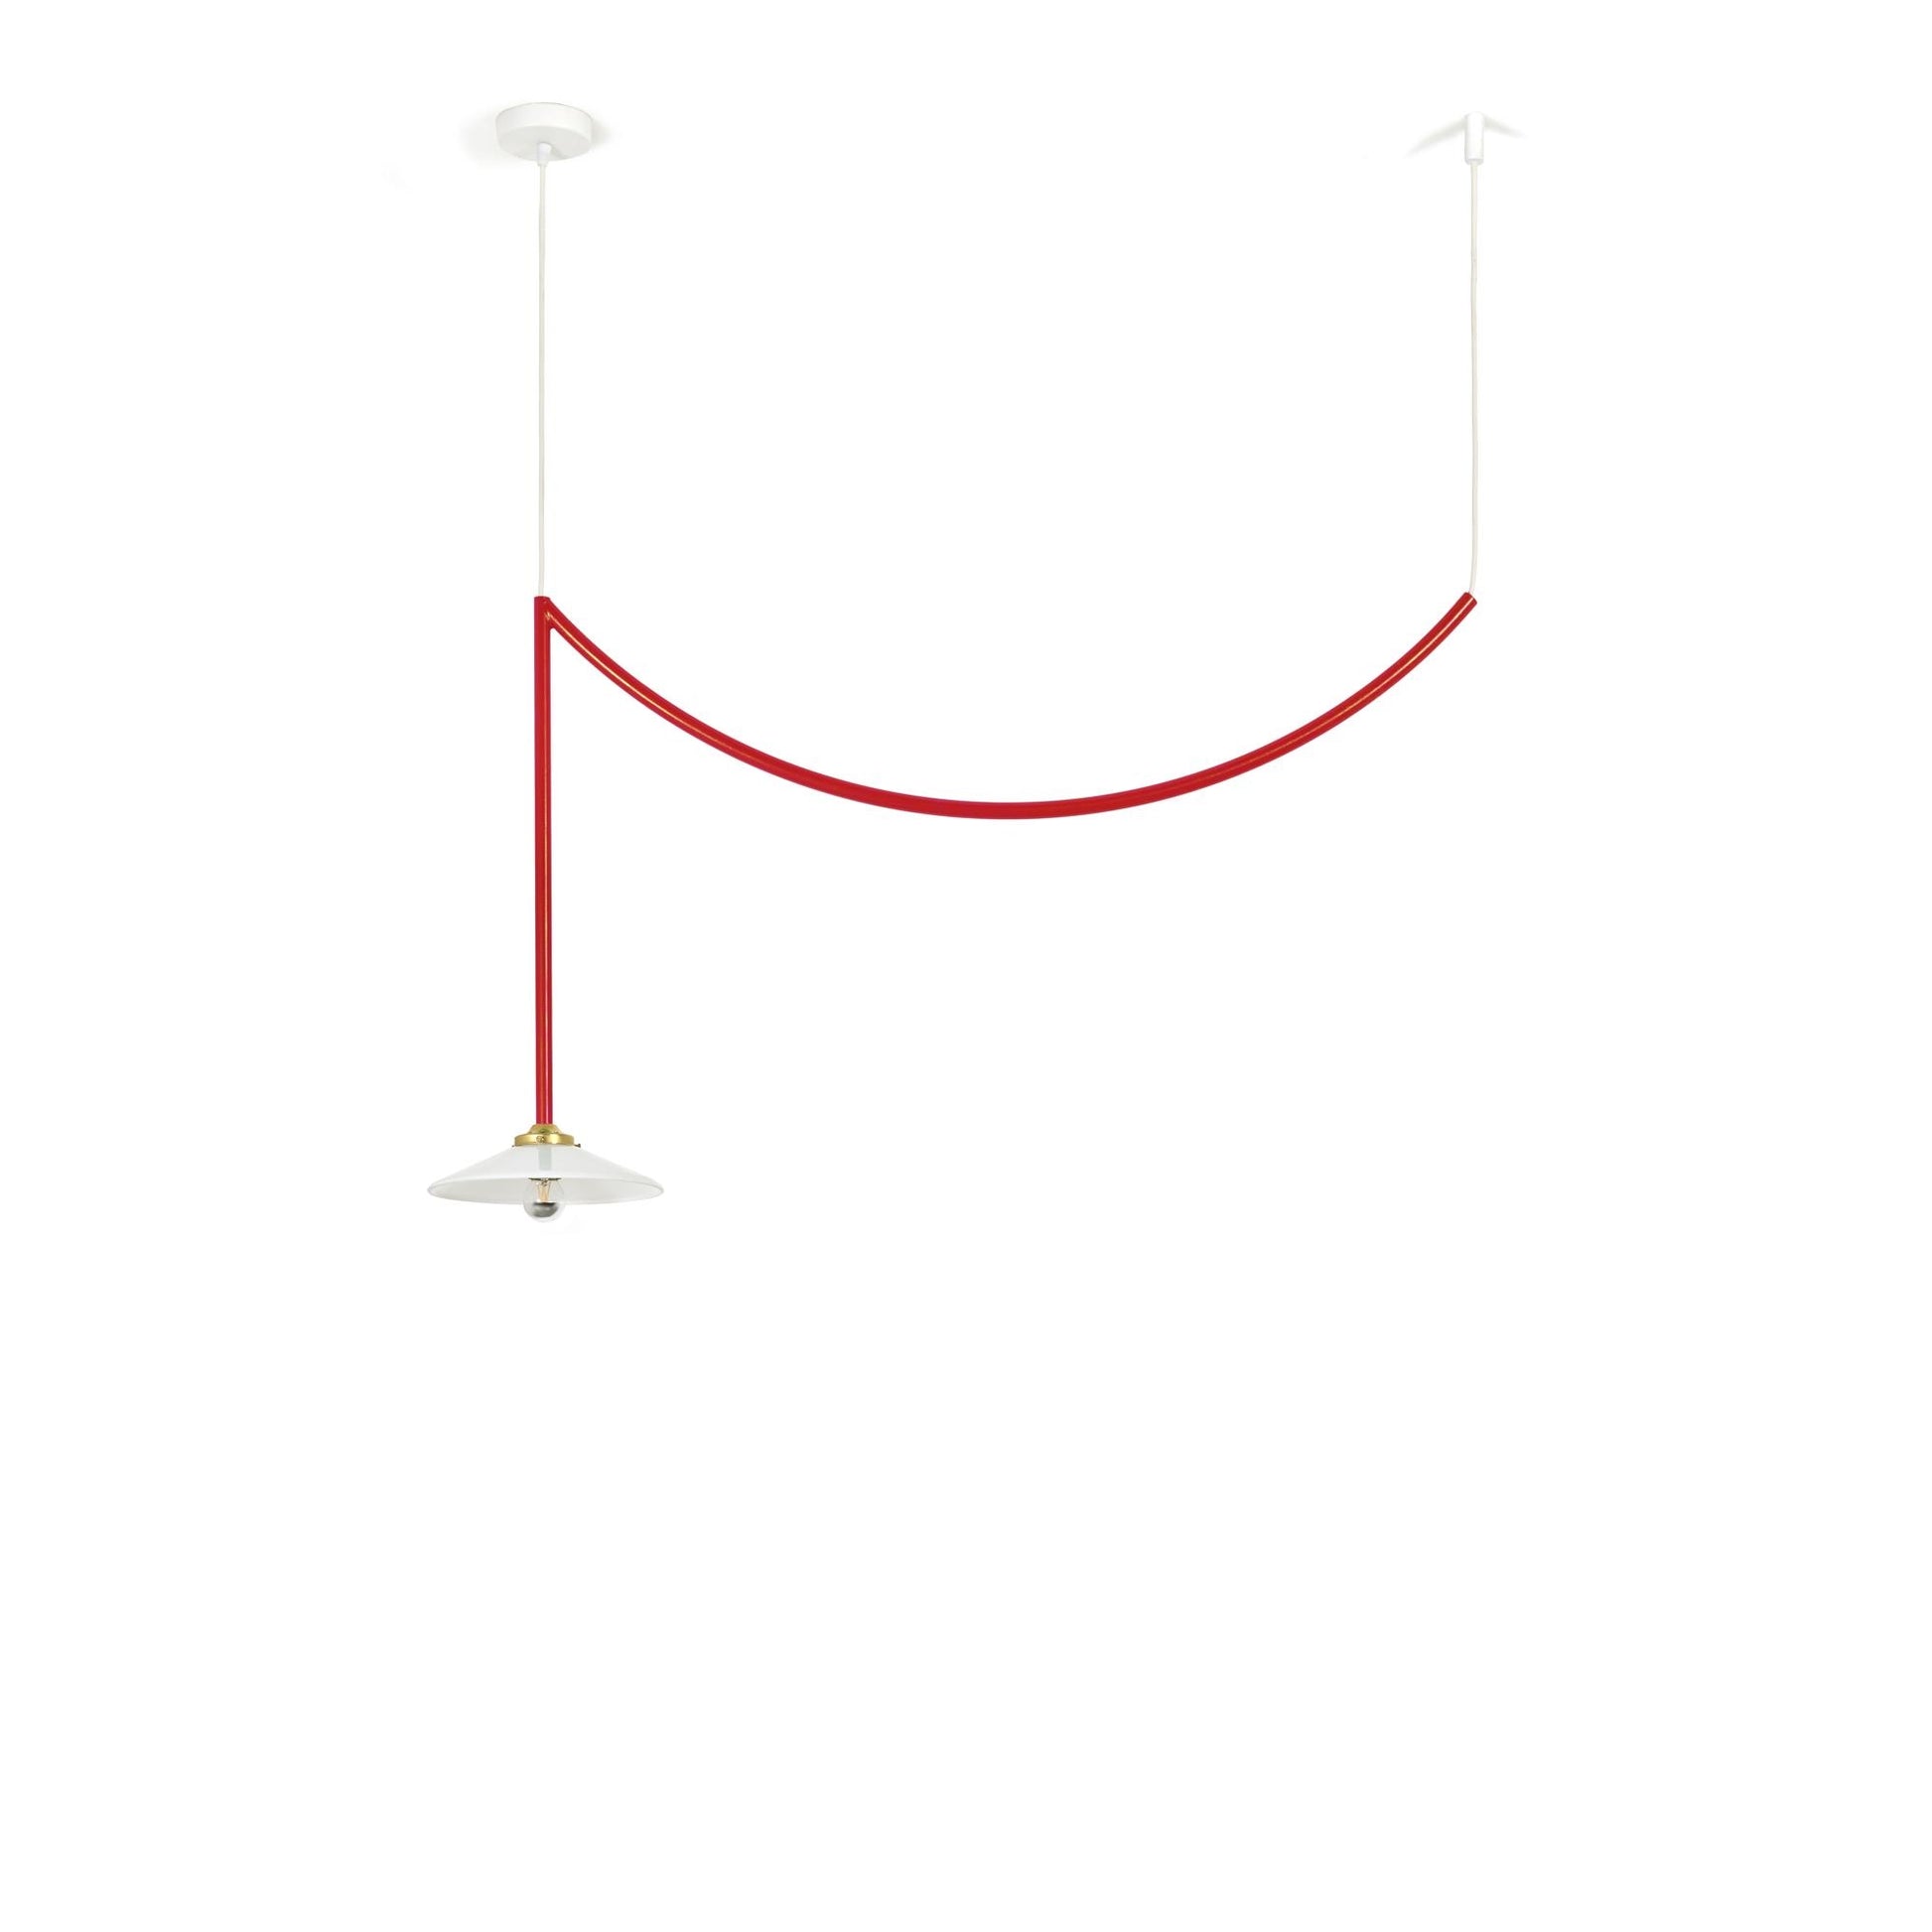 Ceiling Lamp N°5 Ceiling Light by Valerie Objects #Red